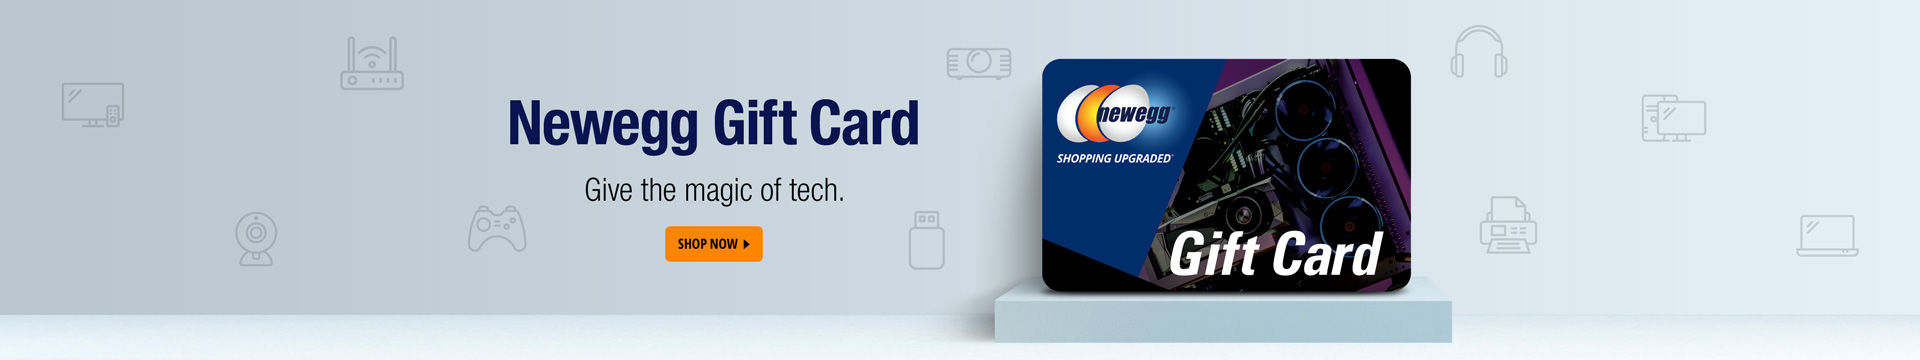 gift-cards-for-travel-movies-gaming-more-newegg